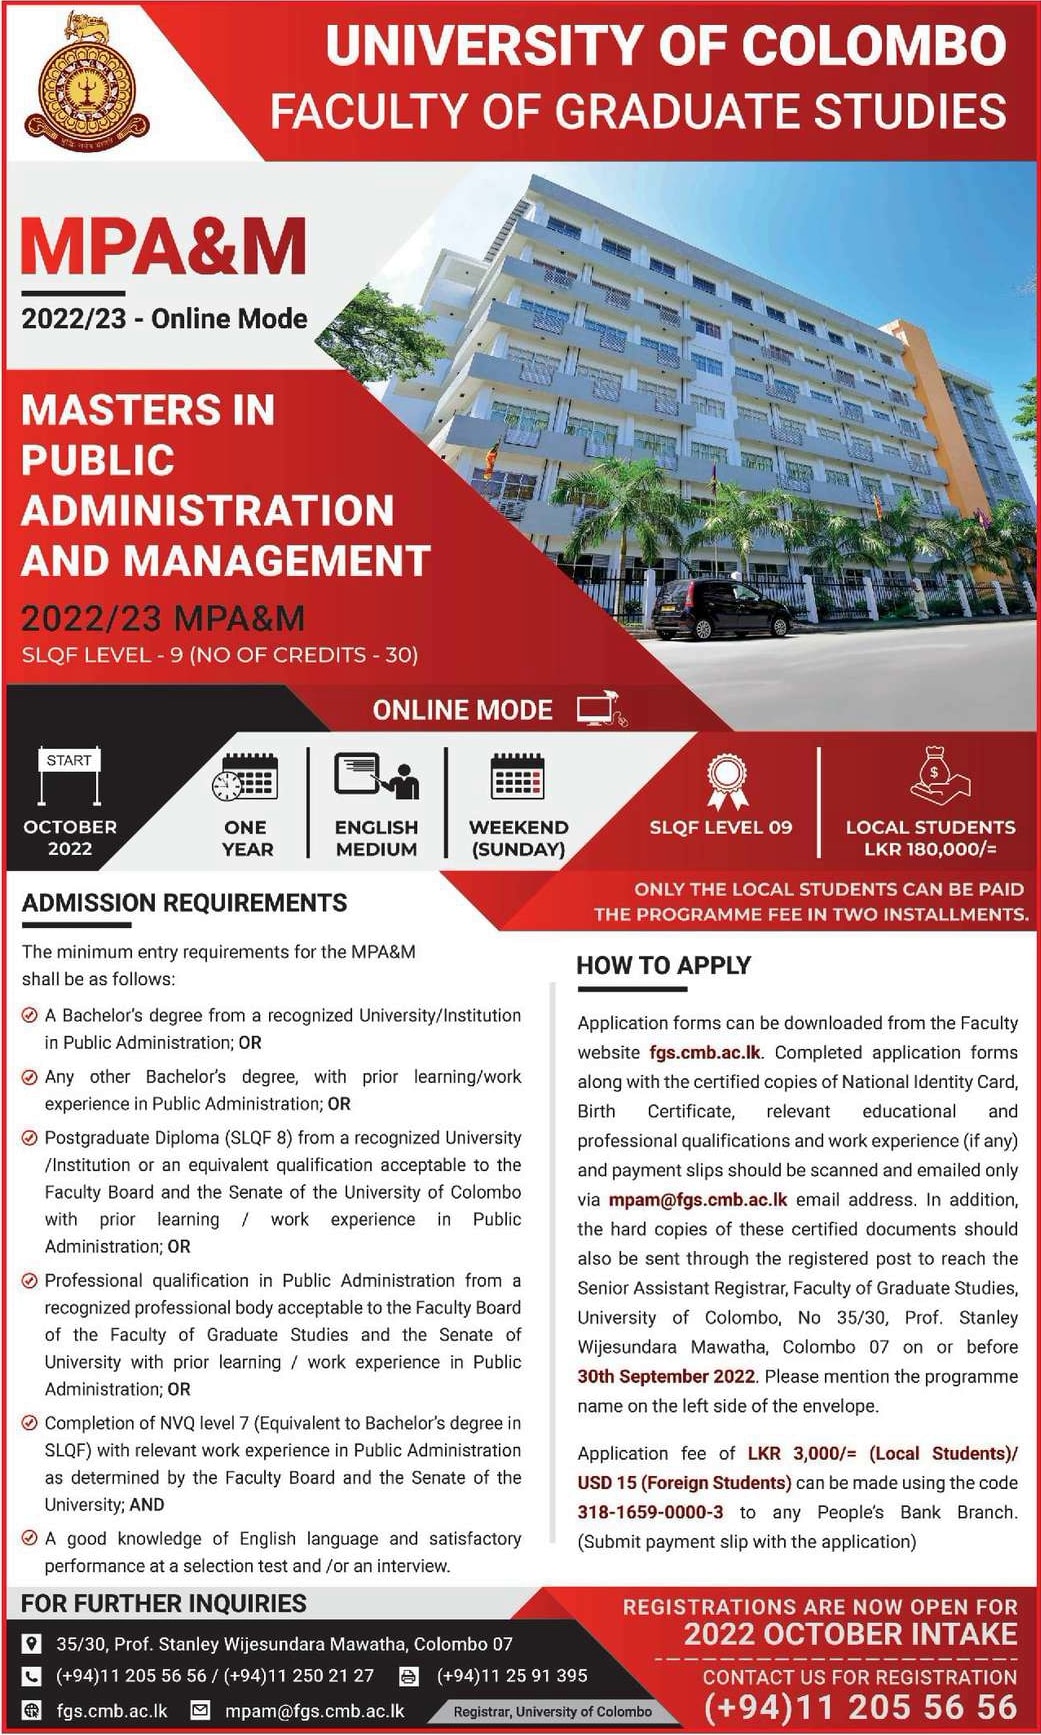 Masters in Public Administration and Management - MPA&M - 2022/23 Online - University of Colombo